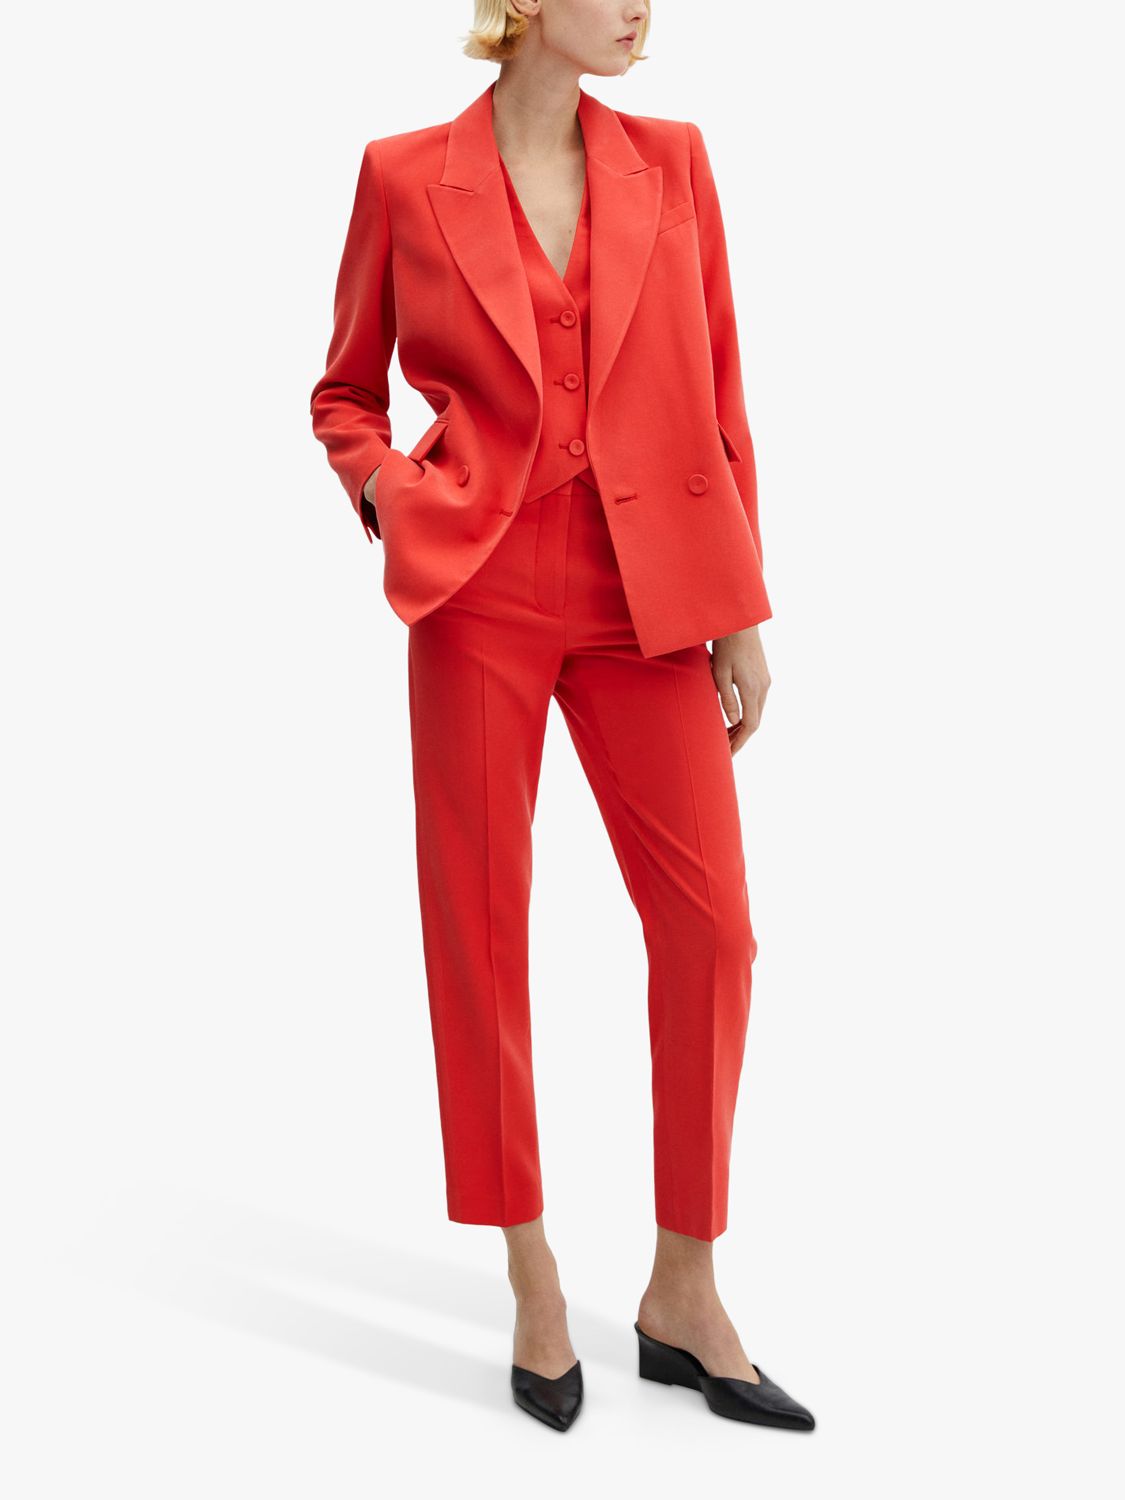 Mango Tempo Suit Waistcoat, Bright Red at John Lewis & Partners